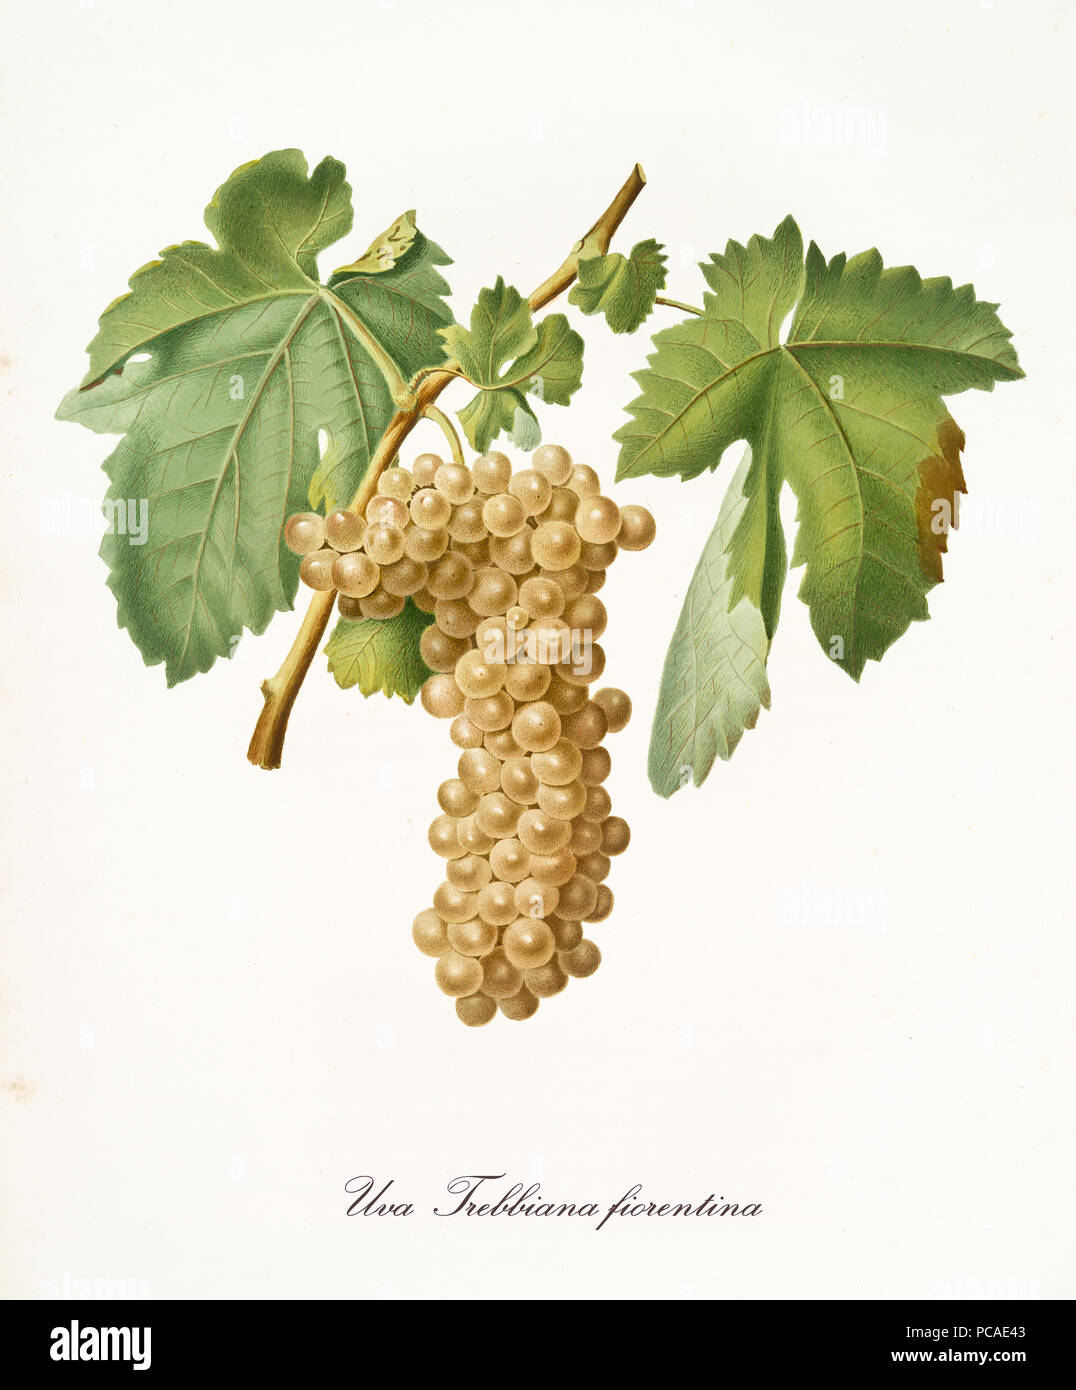 White grape hanging from part of vine branch with leaves. All the elements are isolated over white background. Old detailed botanical illustration by Giorgio Gallesio published in 1817, 1839 Stock Photo